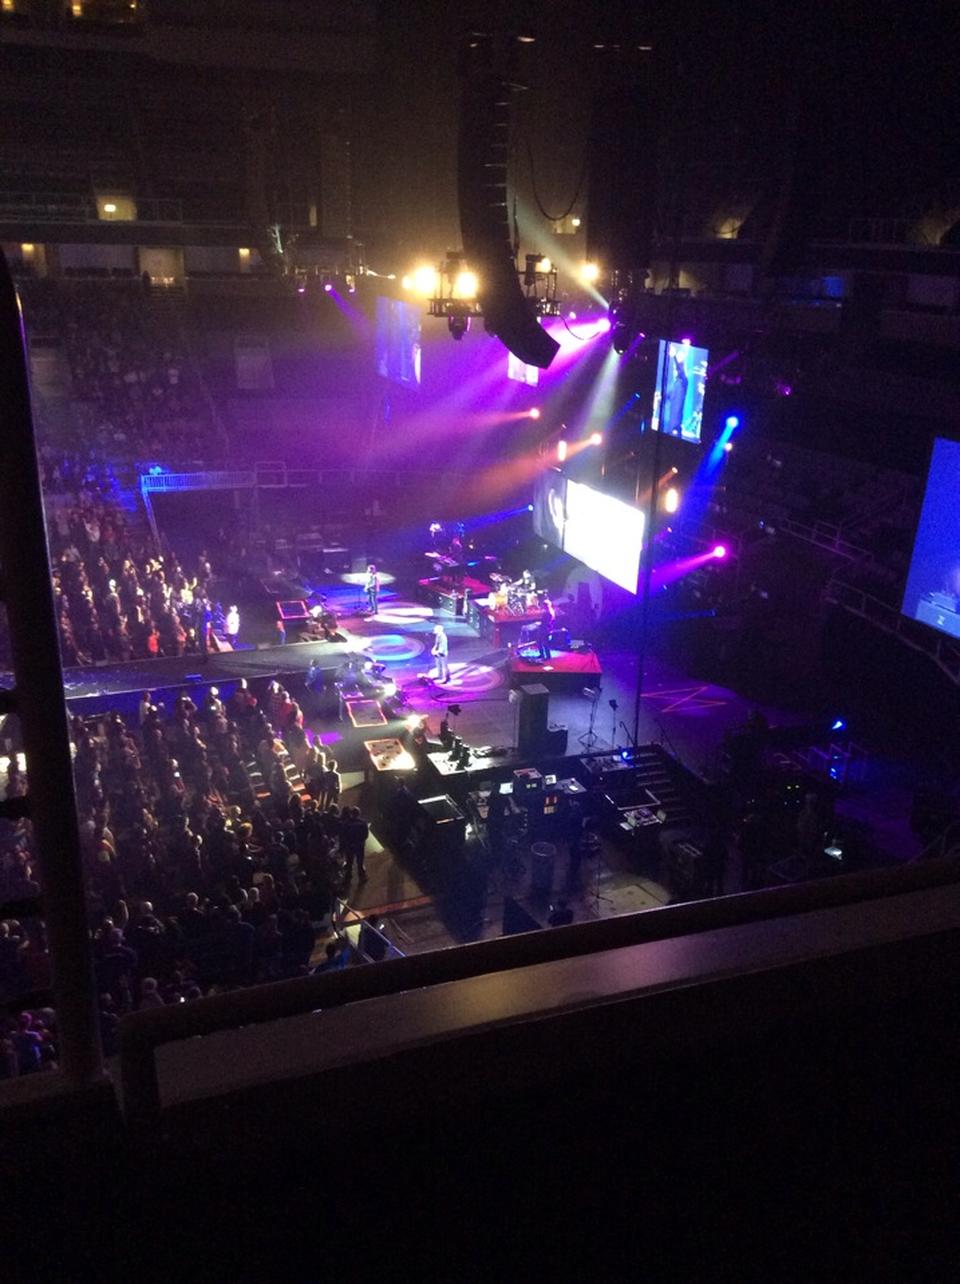 section 228, row 1 seat view  for concert - sap center